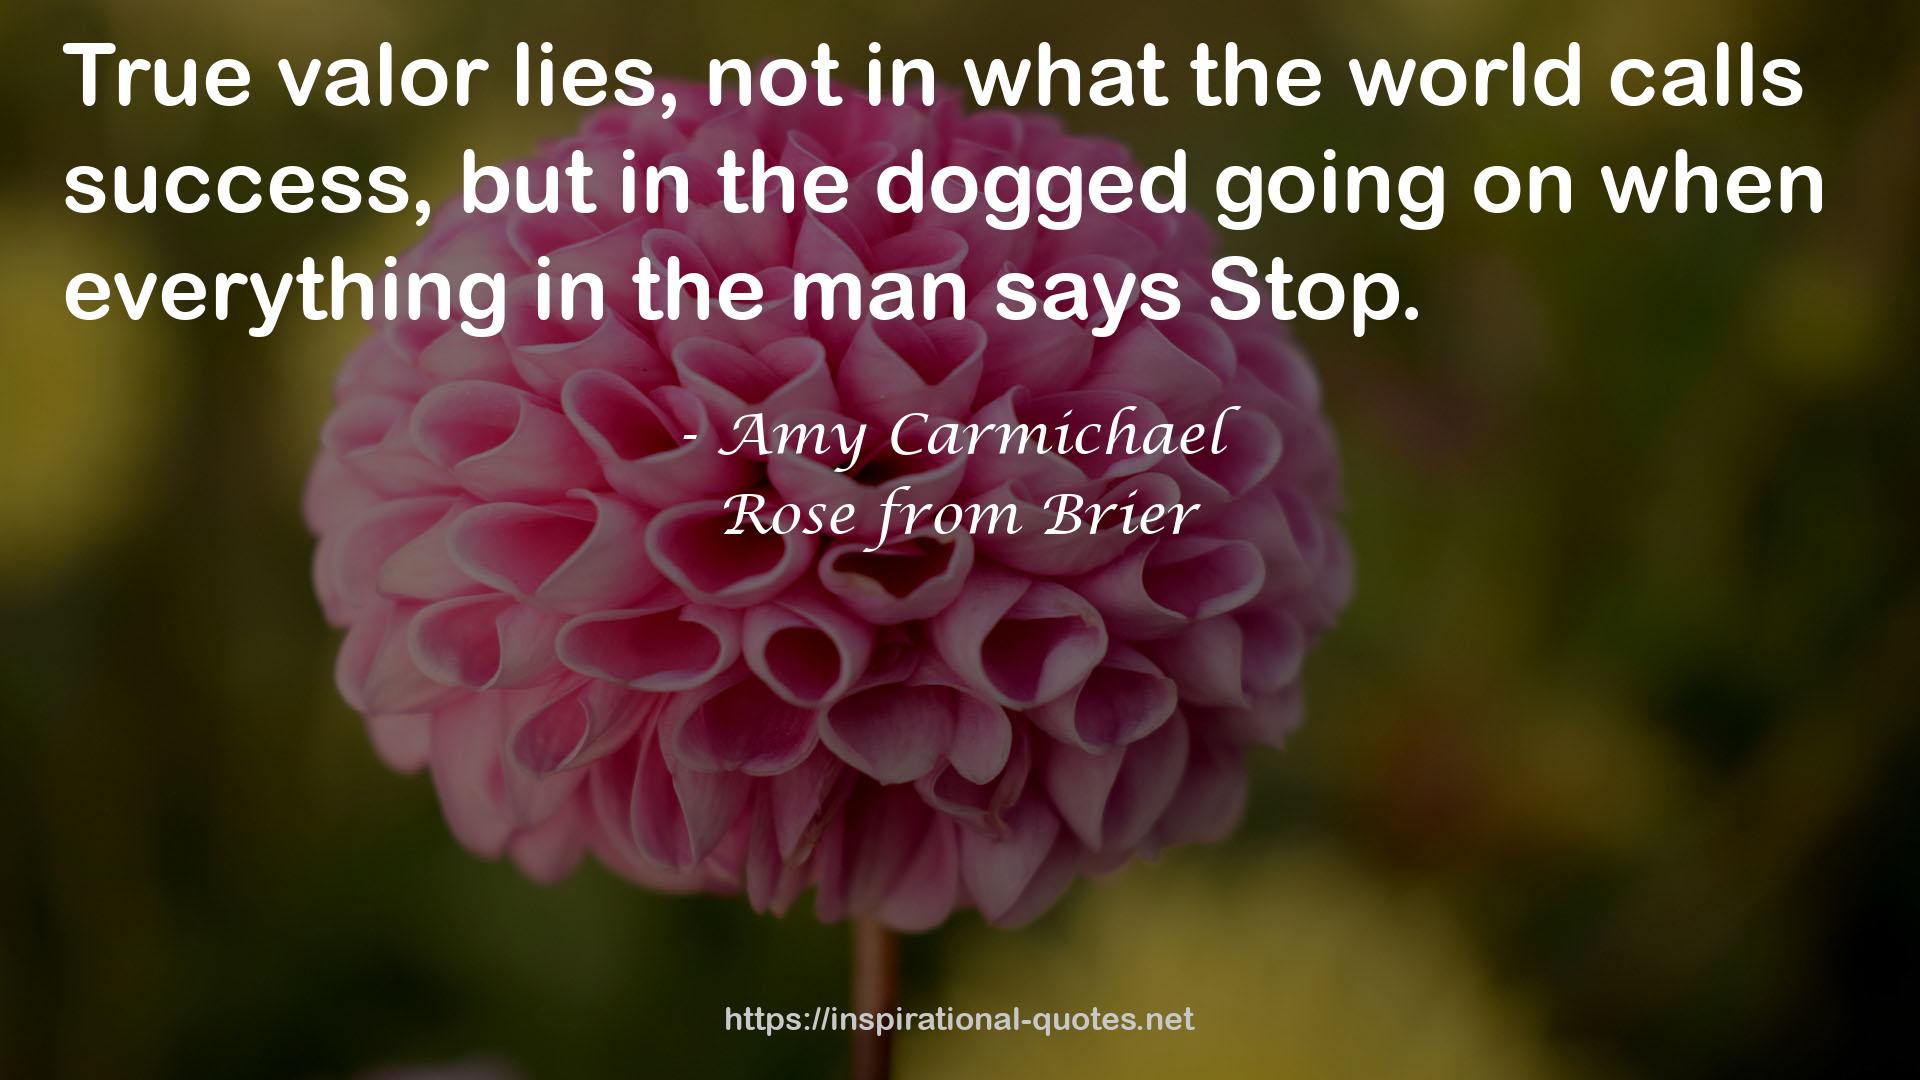 Rose from Brier QUOTES